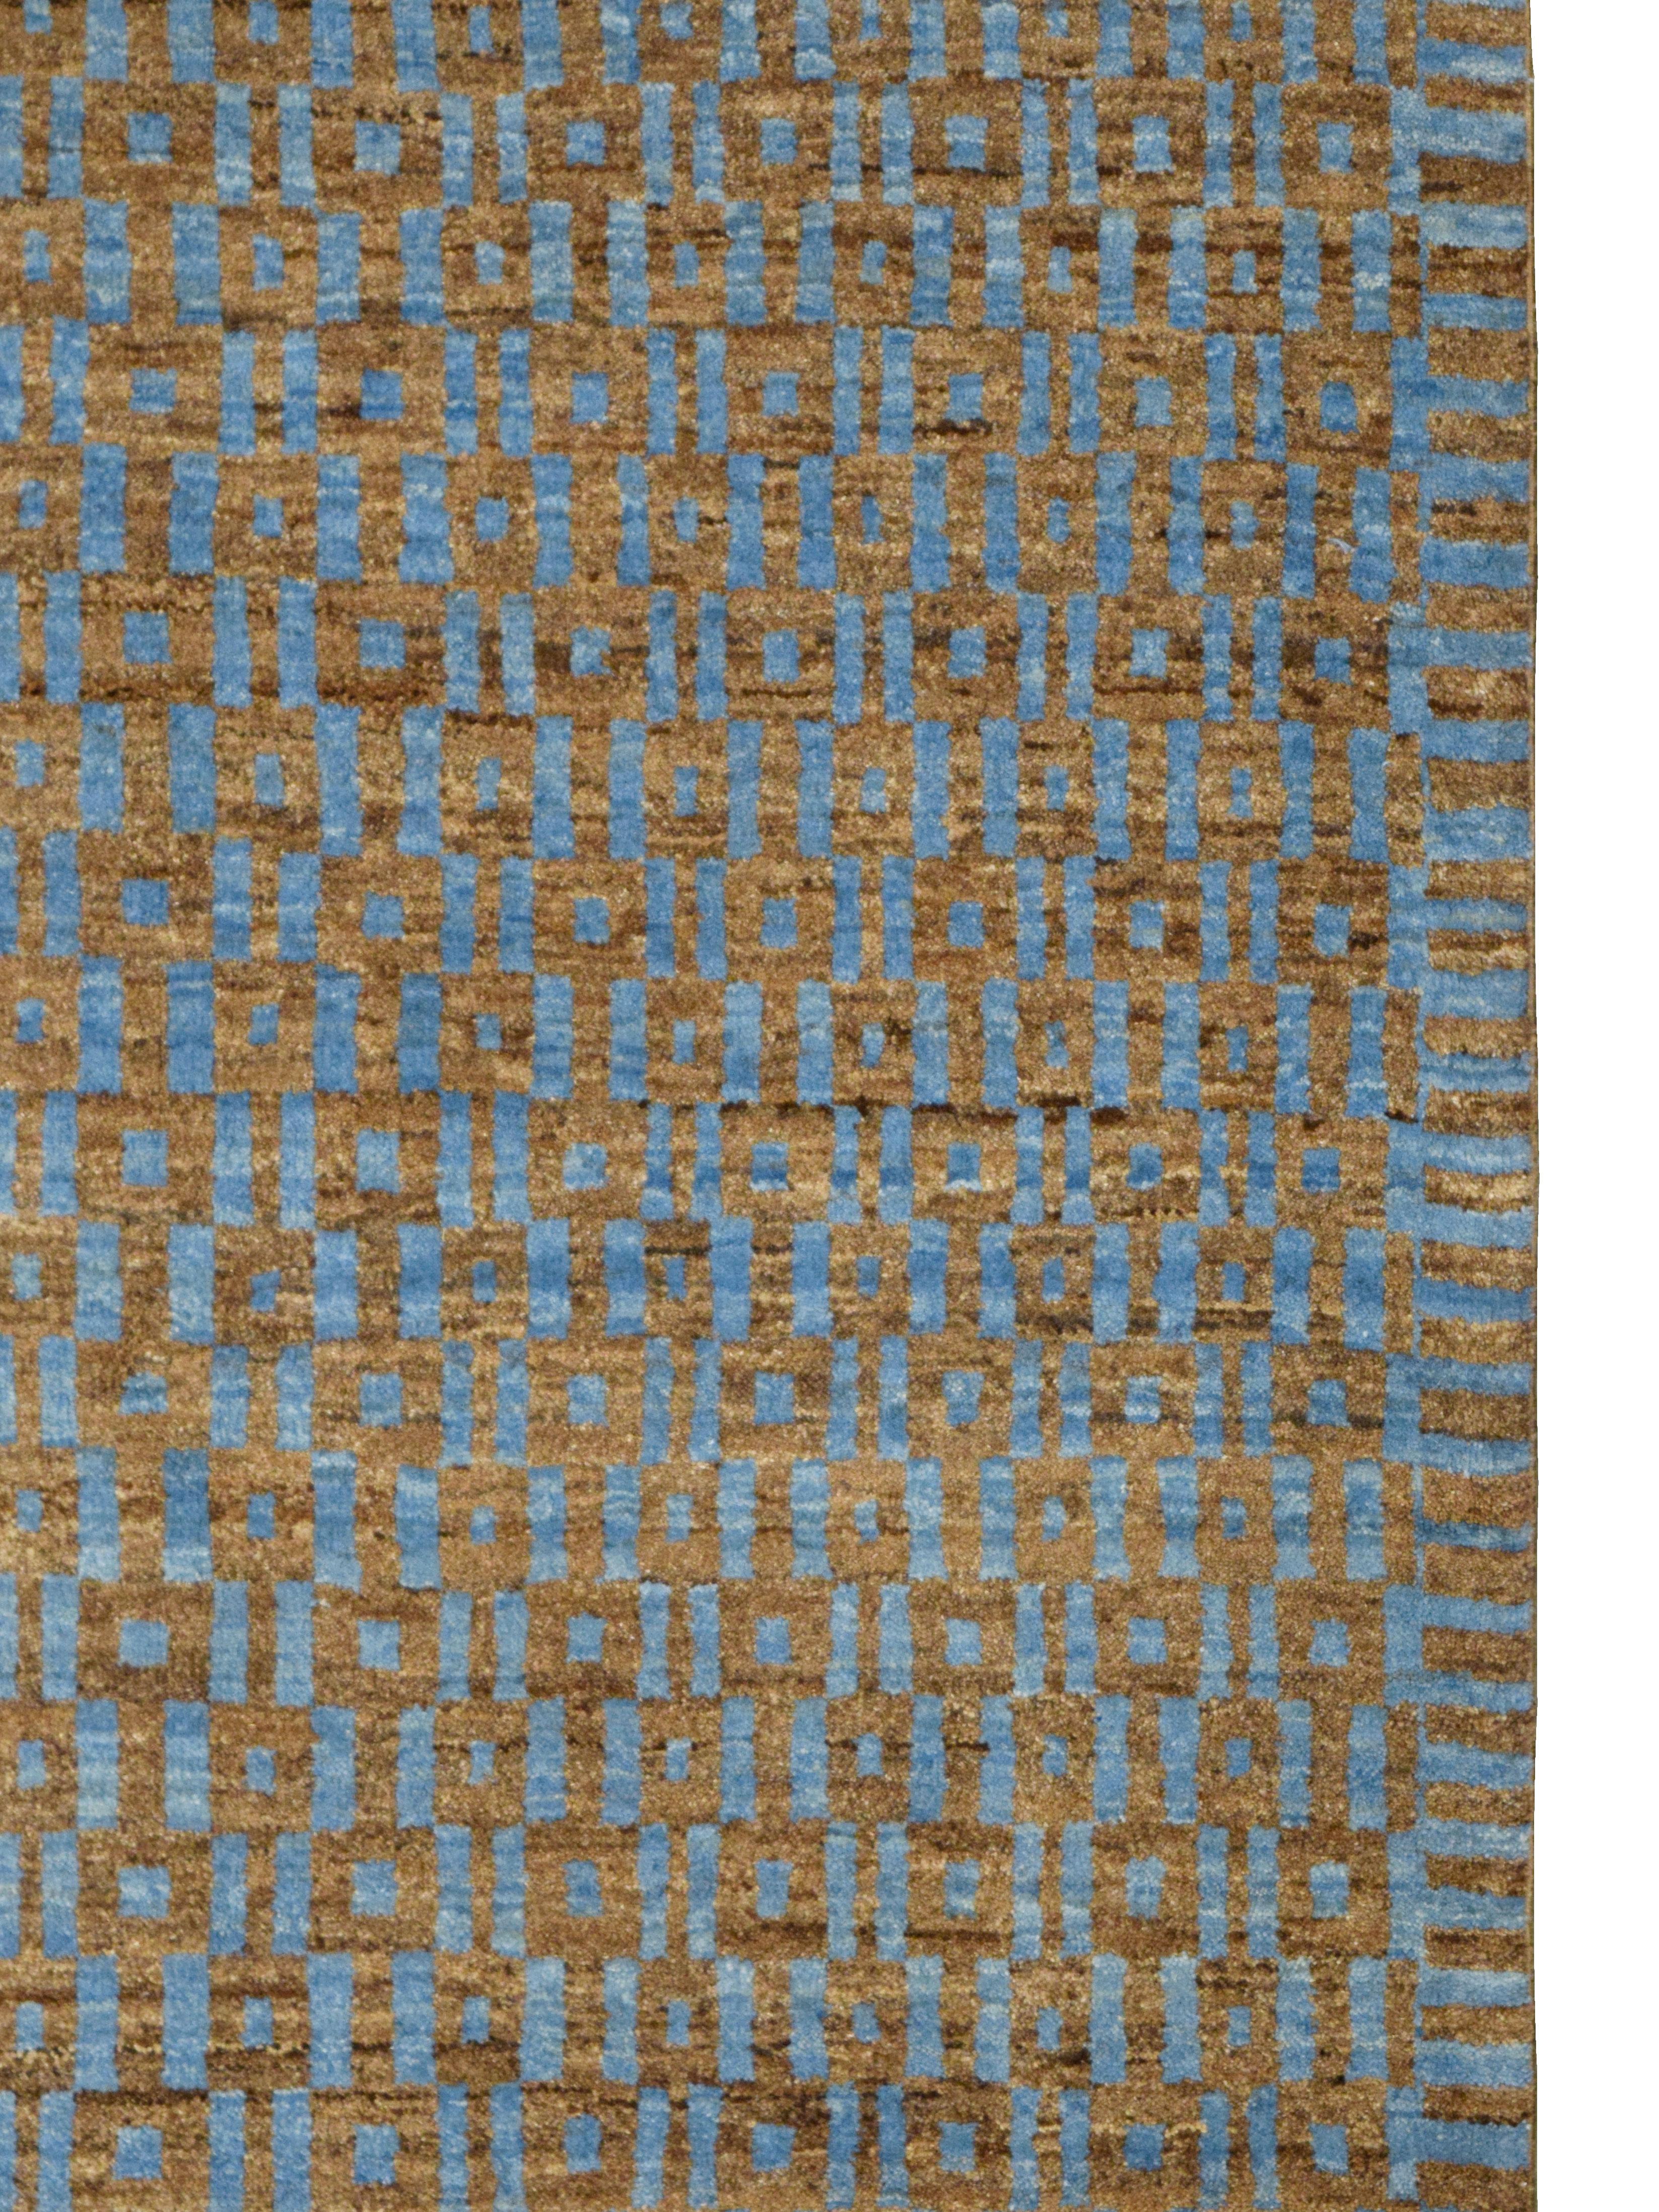 Orley Shabahng, Hand-Knotted, Art Deco Wool Persian Carpet, Blue, Brown, 5'x 12' For Sale 1